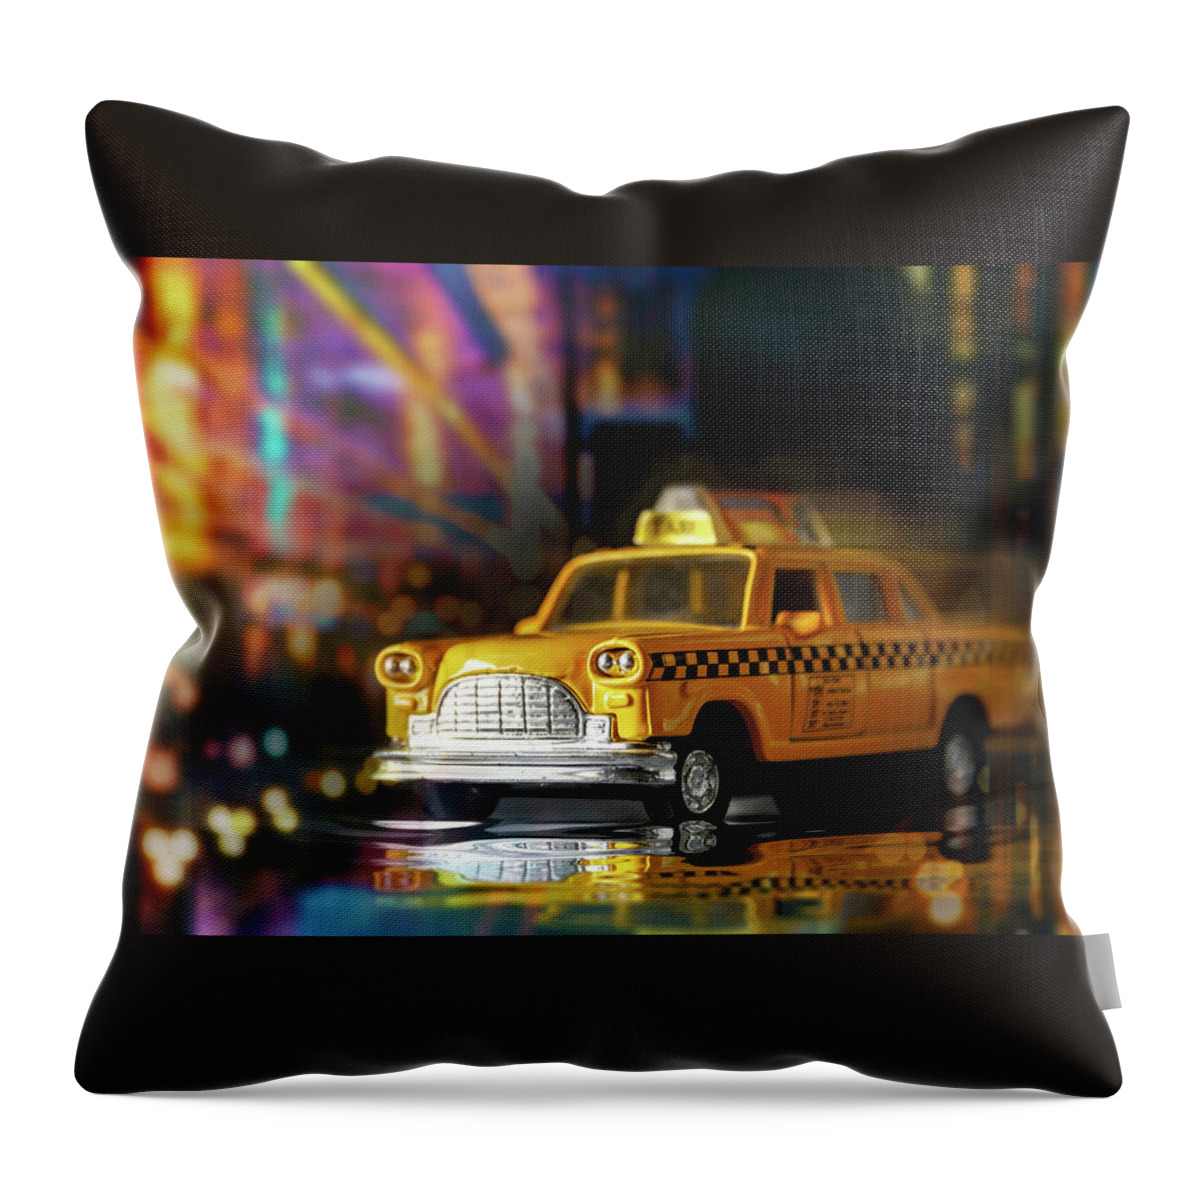 Nyc Throw Pillow featuring the photograph Iconic Yellow NYC Cab by Carol Japp